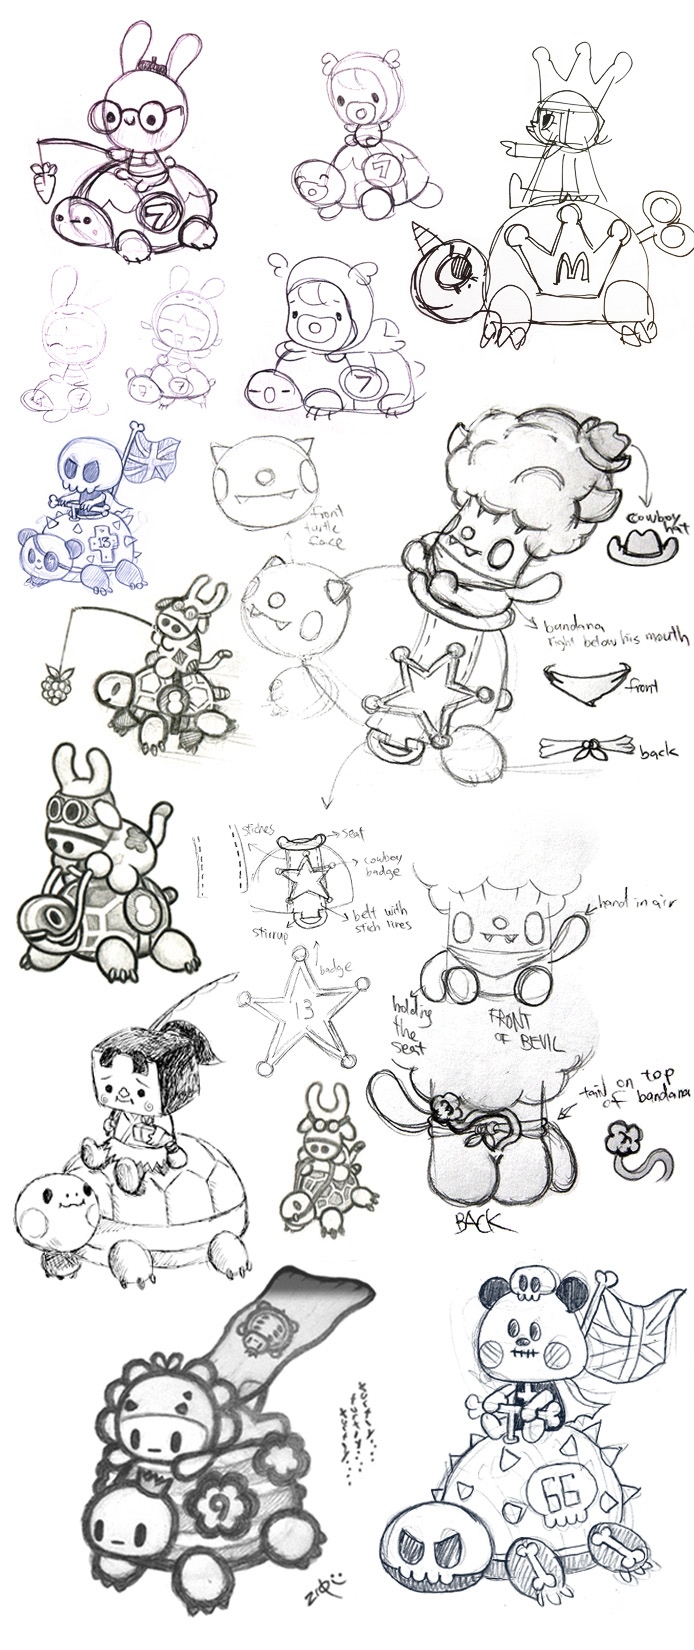 turtly races sketches